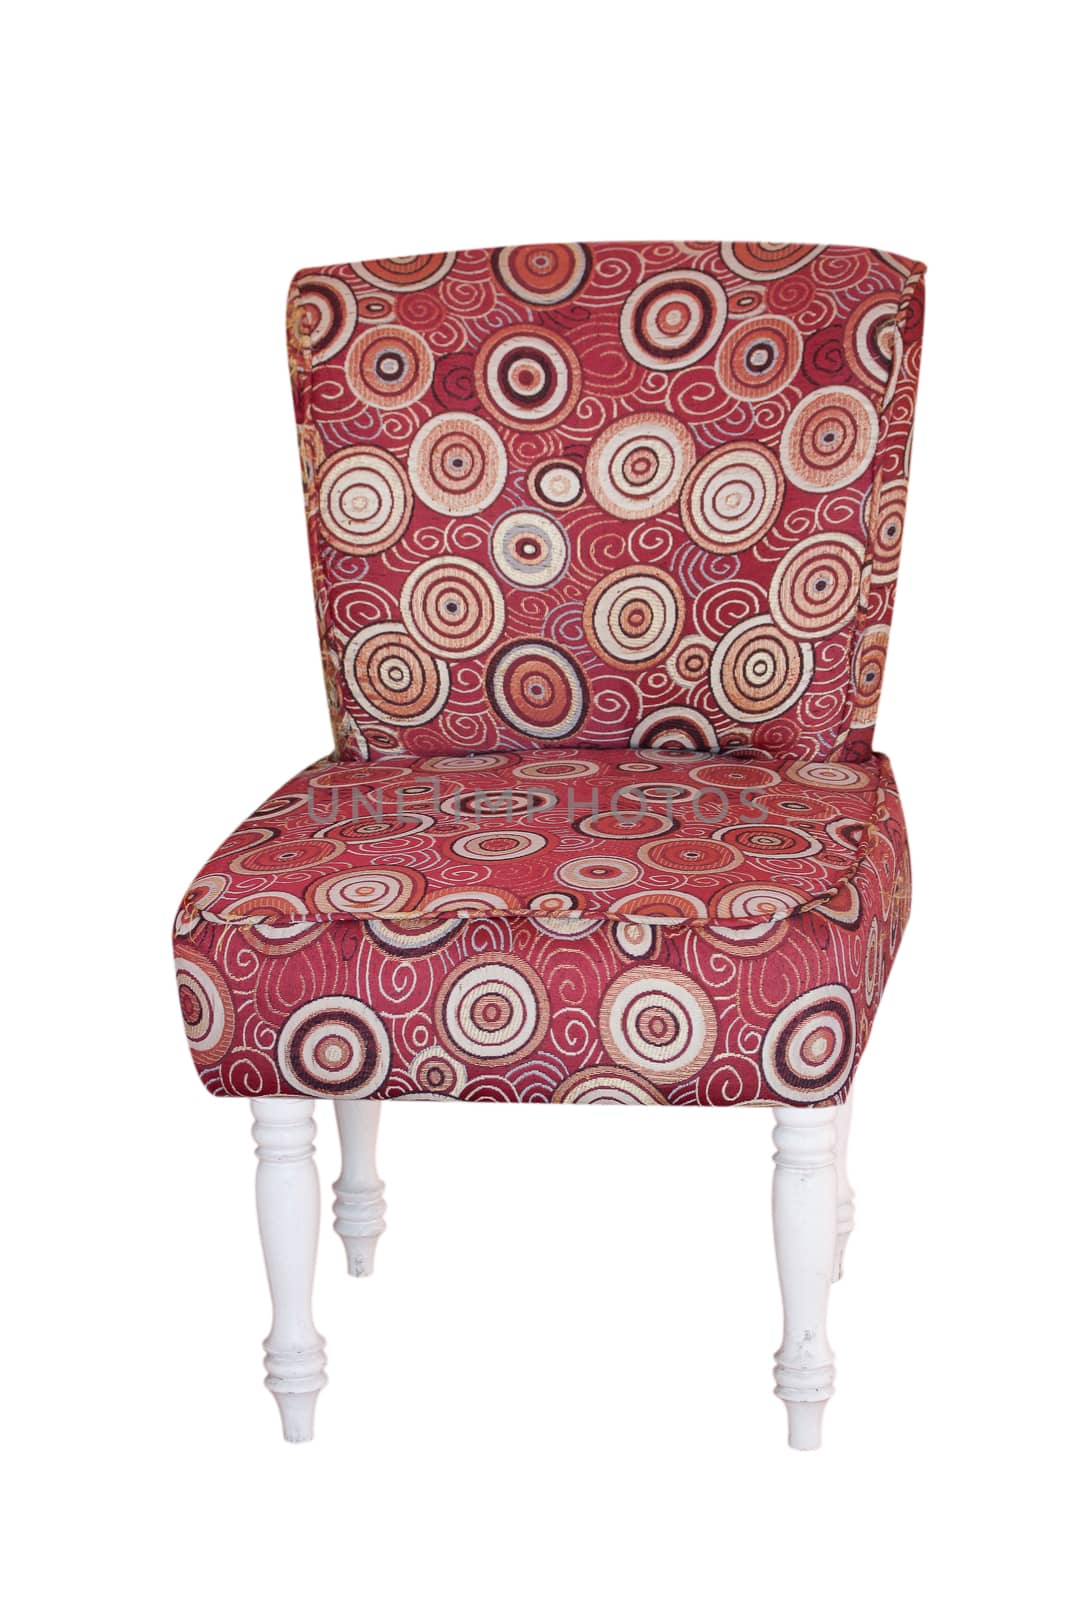 red vintage fabric chair isolated on white.